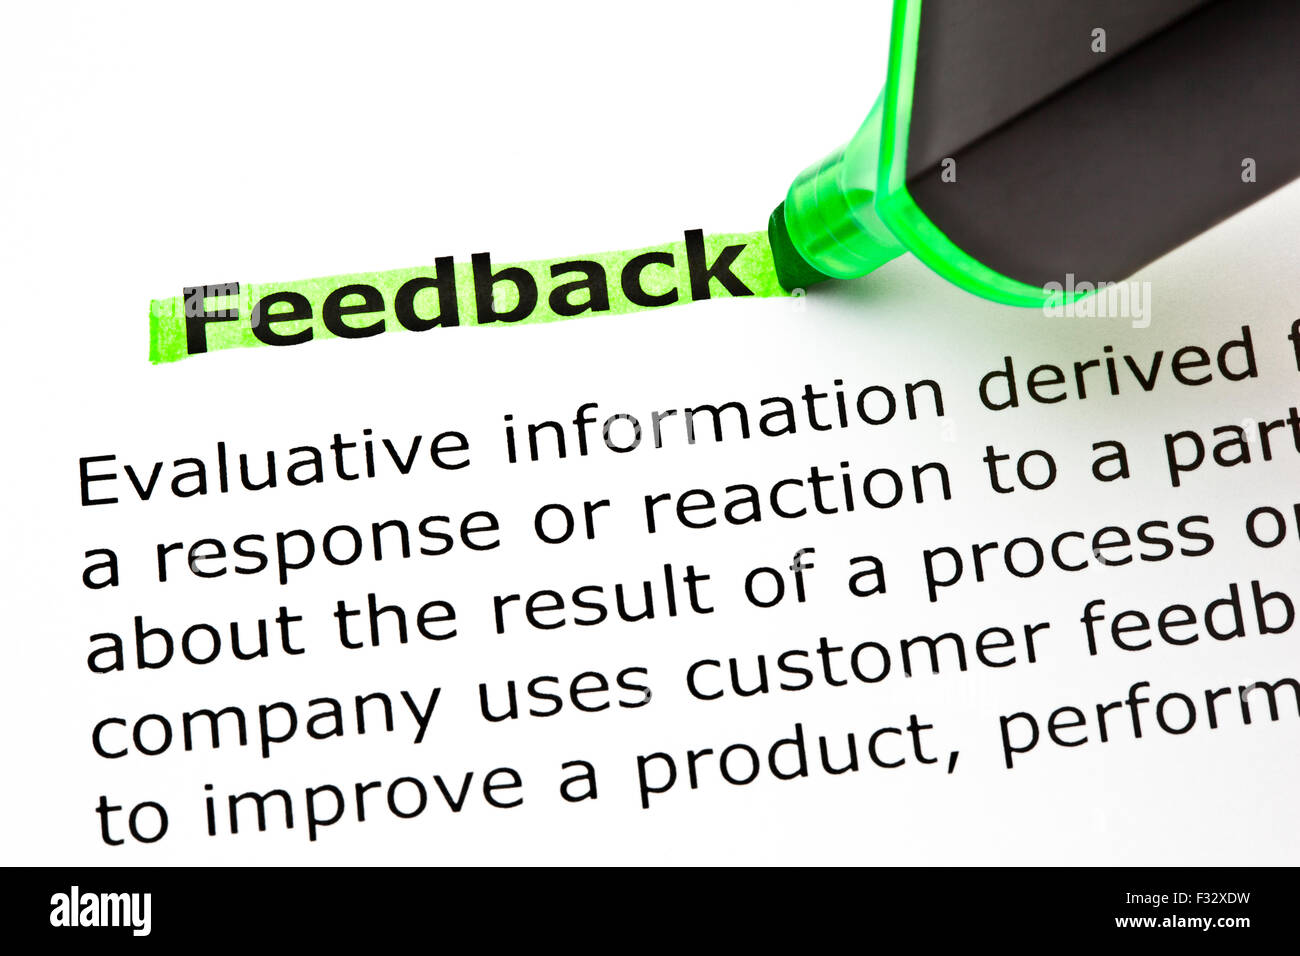 Definition of the word Feedback, highlighted with green felt tip pen. Stock Photo